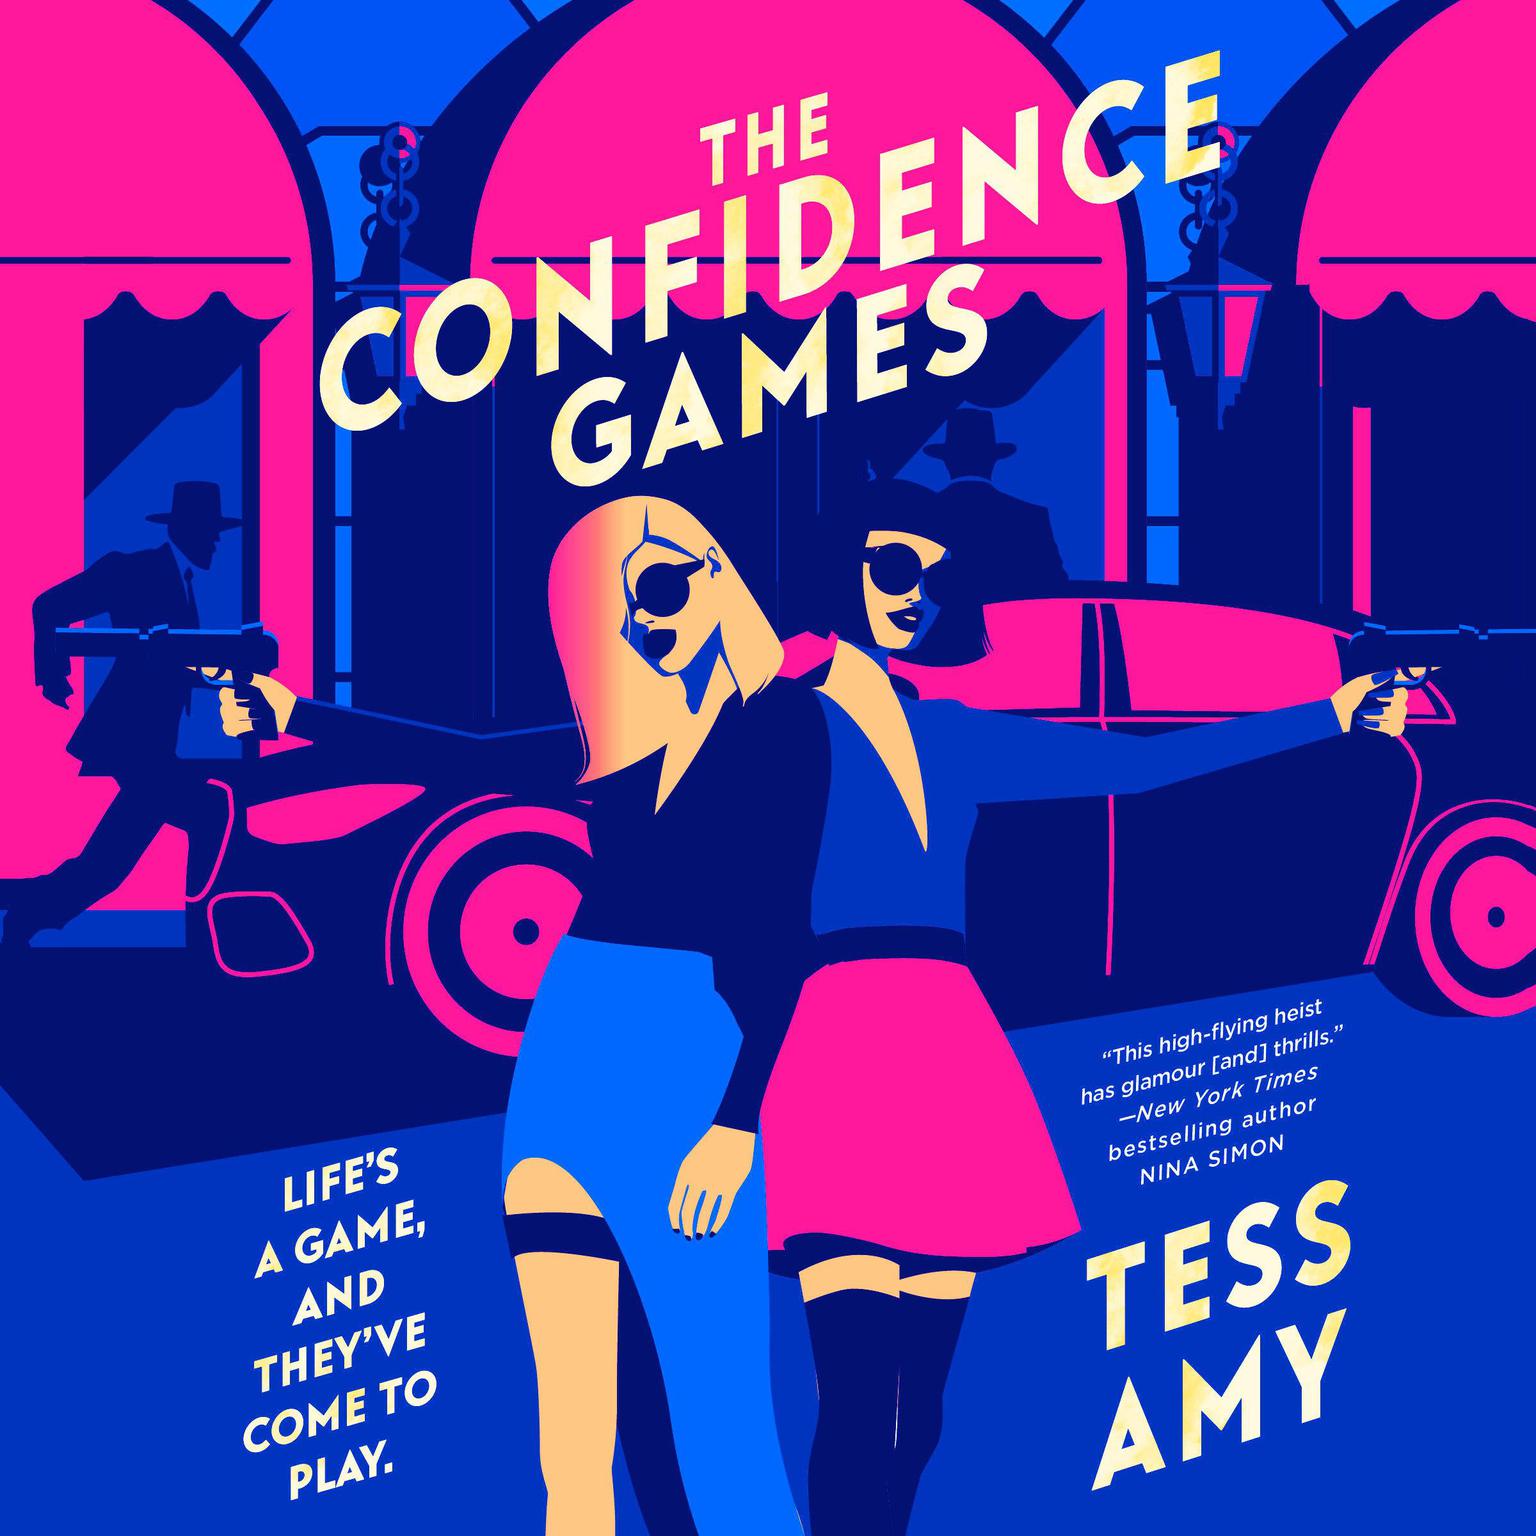 The Confidence Games Audiobook, by Tess Amy